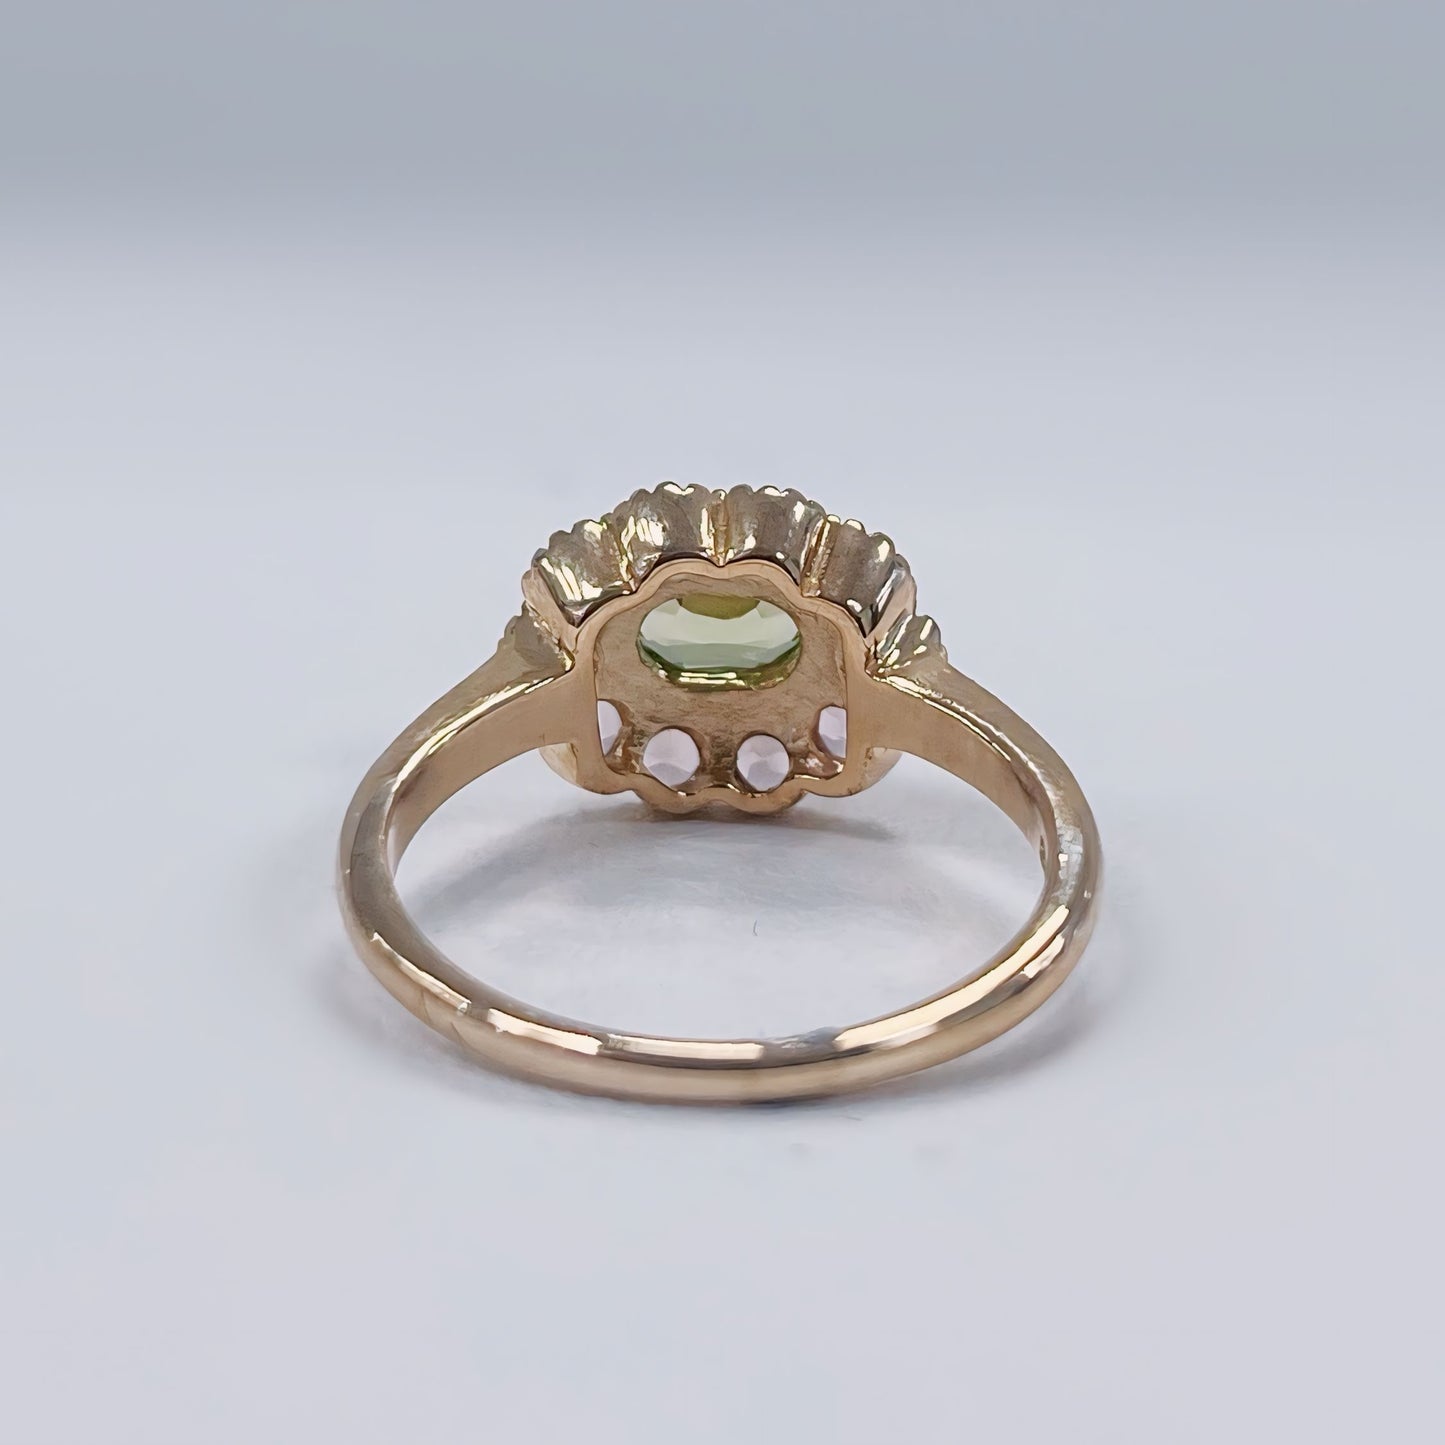 Victorian Reproduction 9ct Yellow Gold Peridot and Pink Tourmaline Floral Inspired Ring - Size O